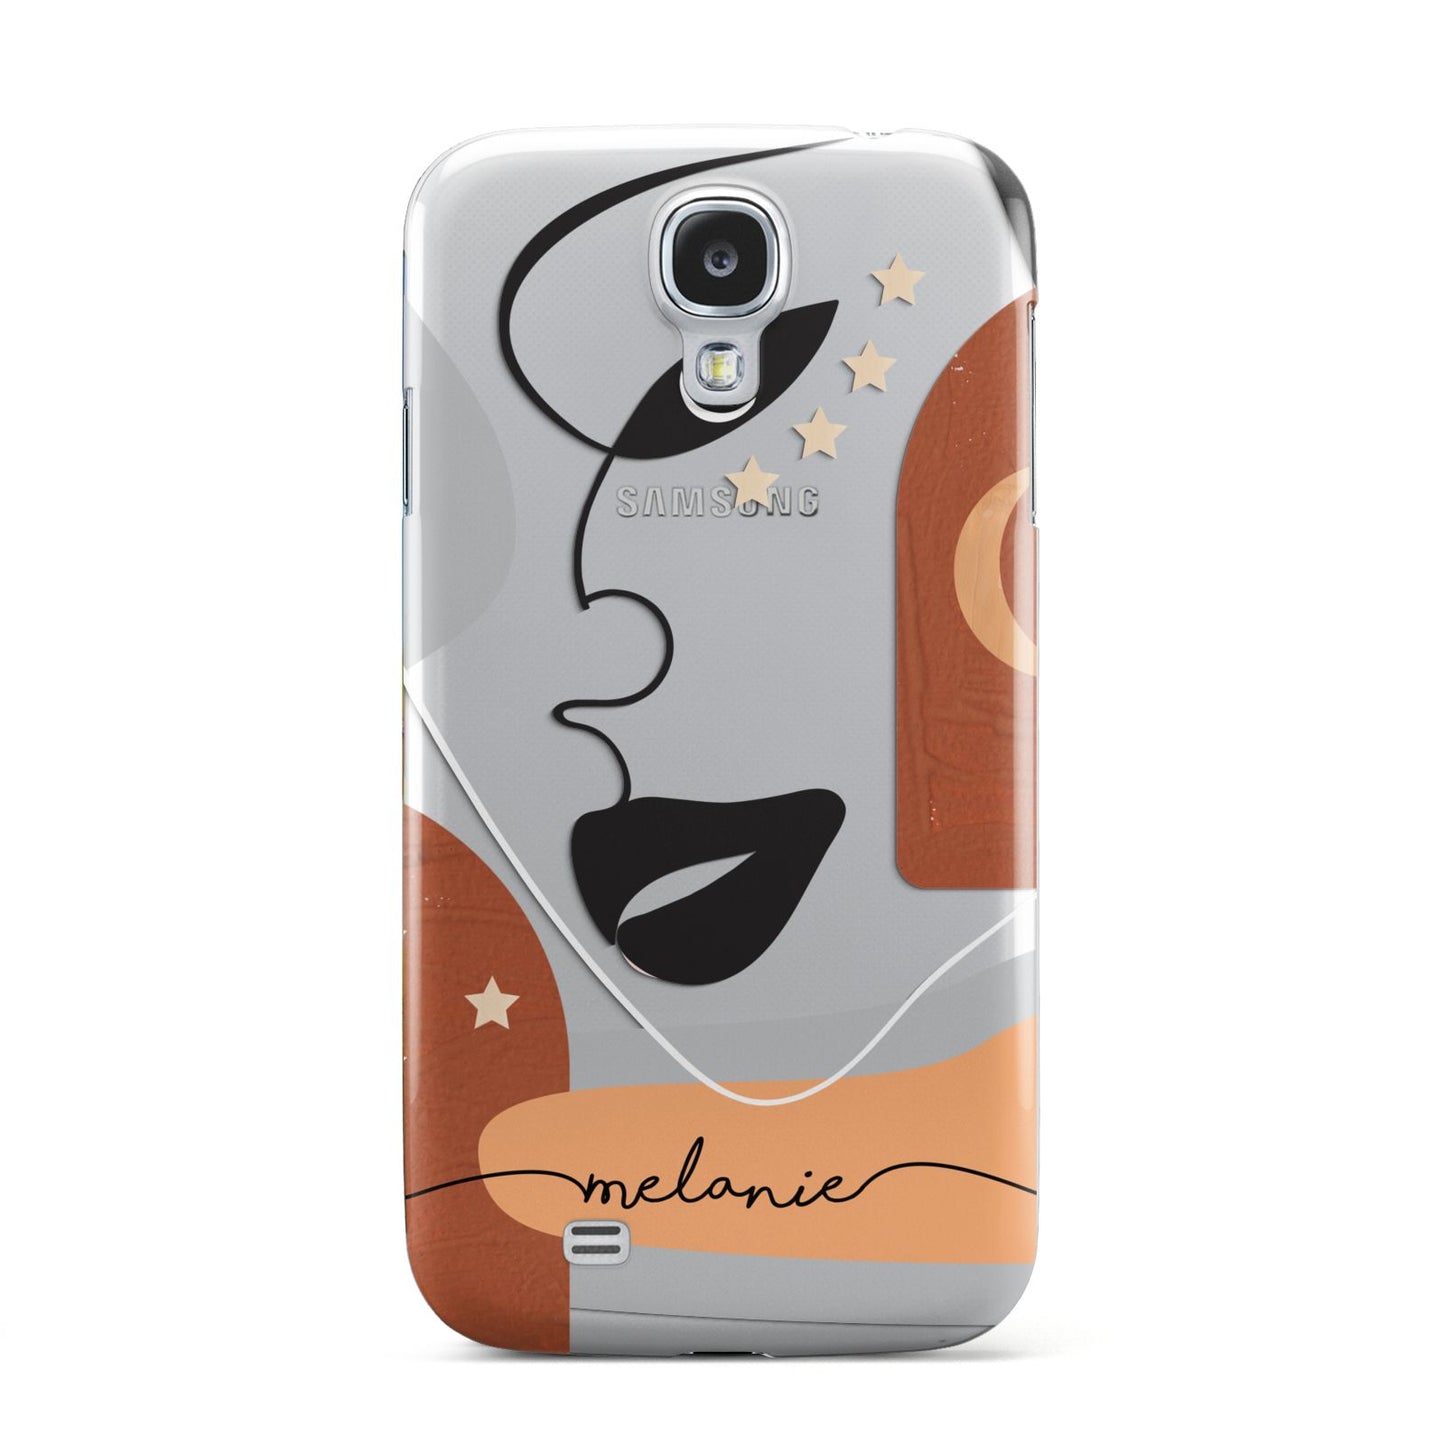 Personalised Line Art Samsung Galaxy S4 Case